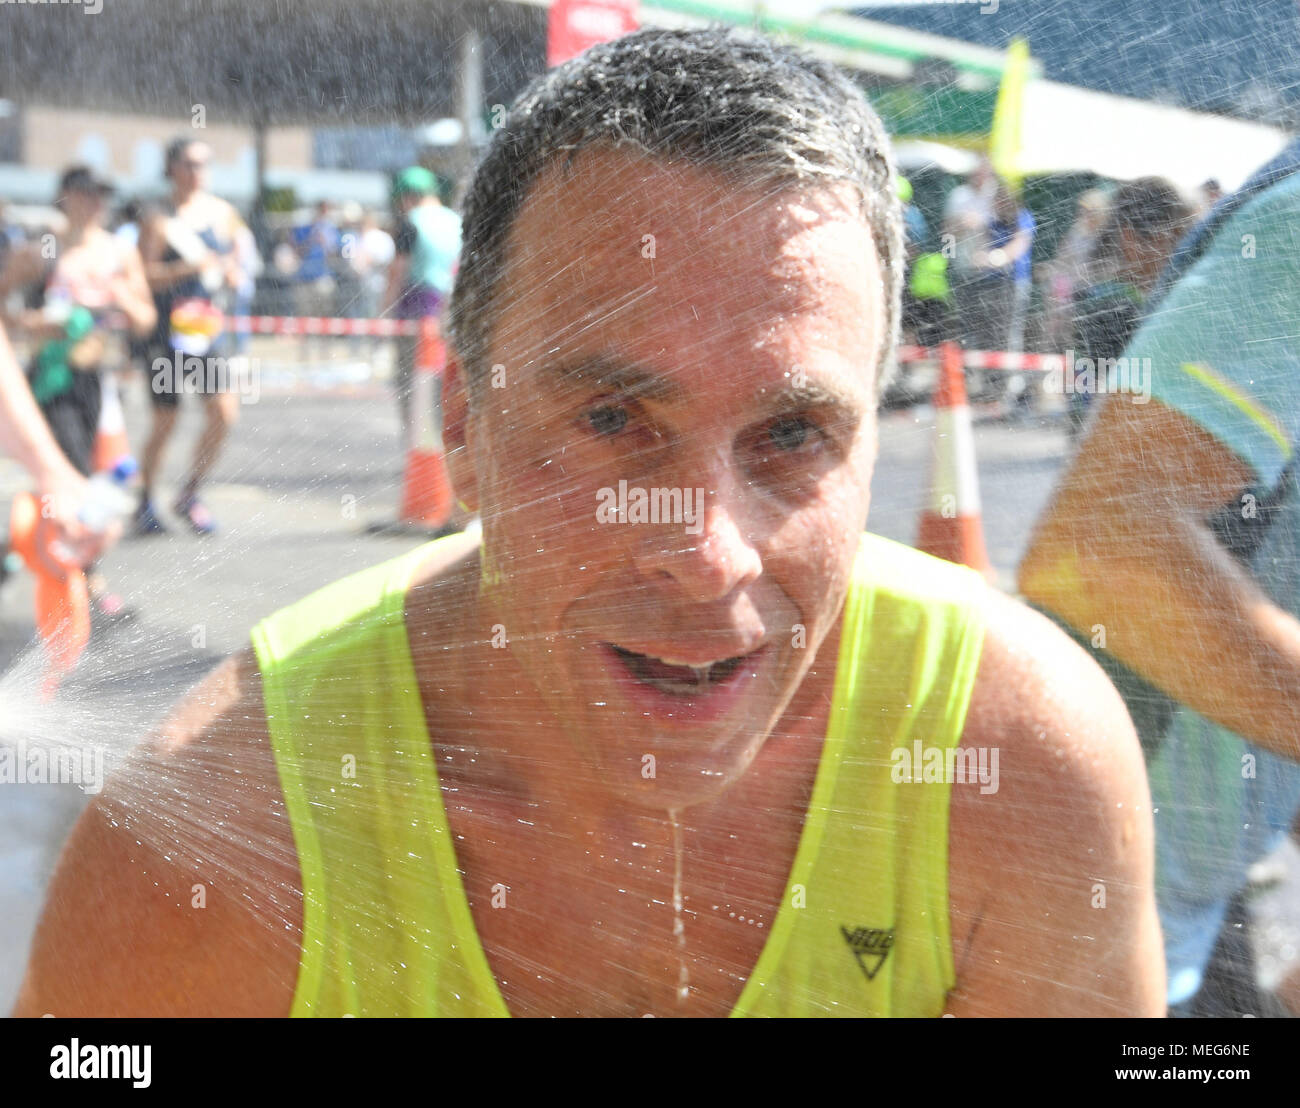 A runner uses a shower to cool off during the 2018 Virgin Money London Marathon. Stock Photo